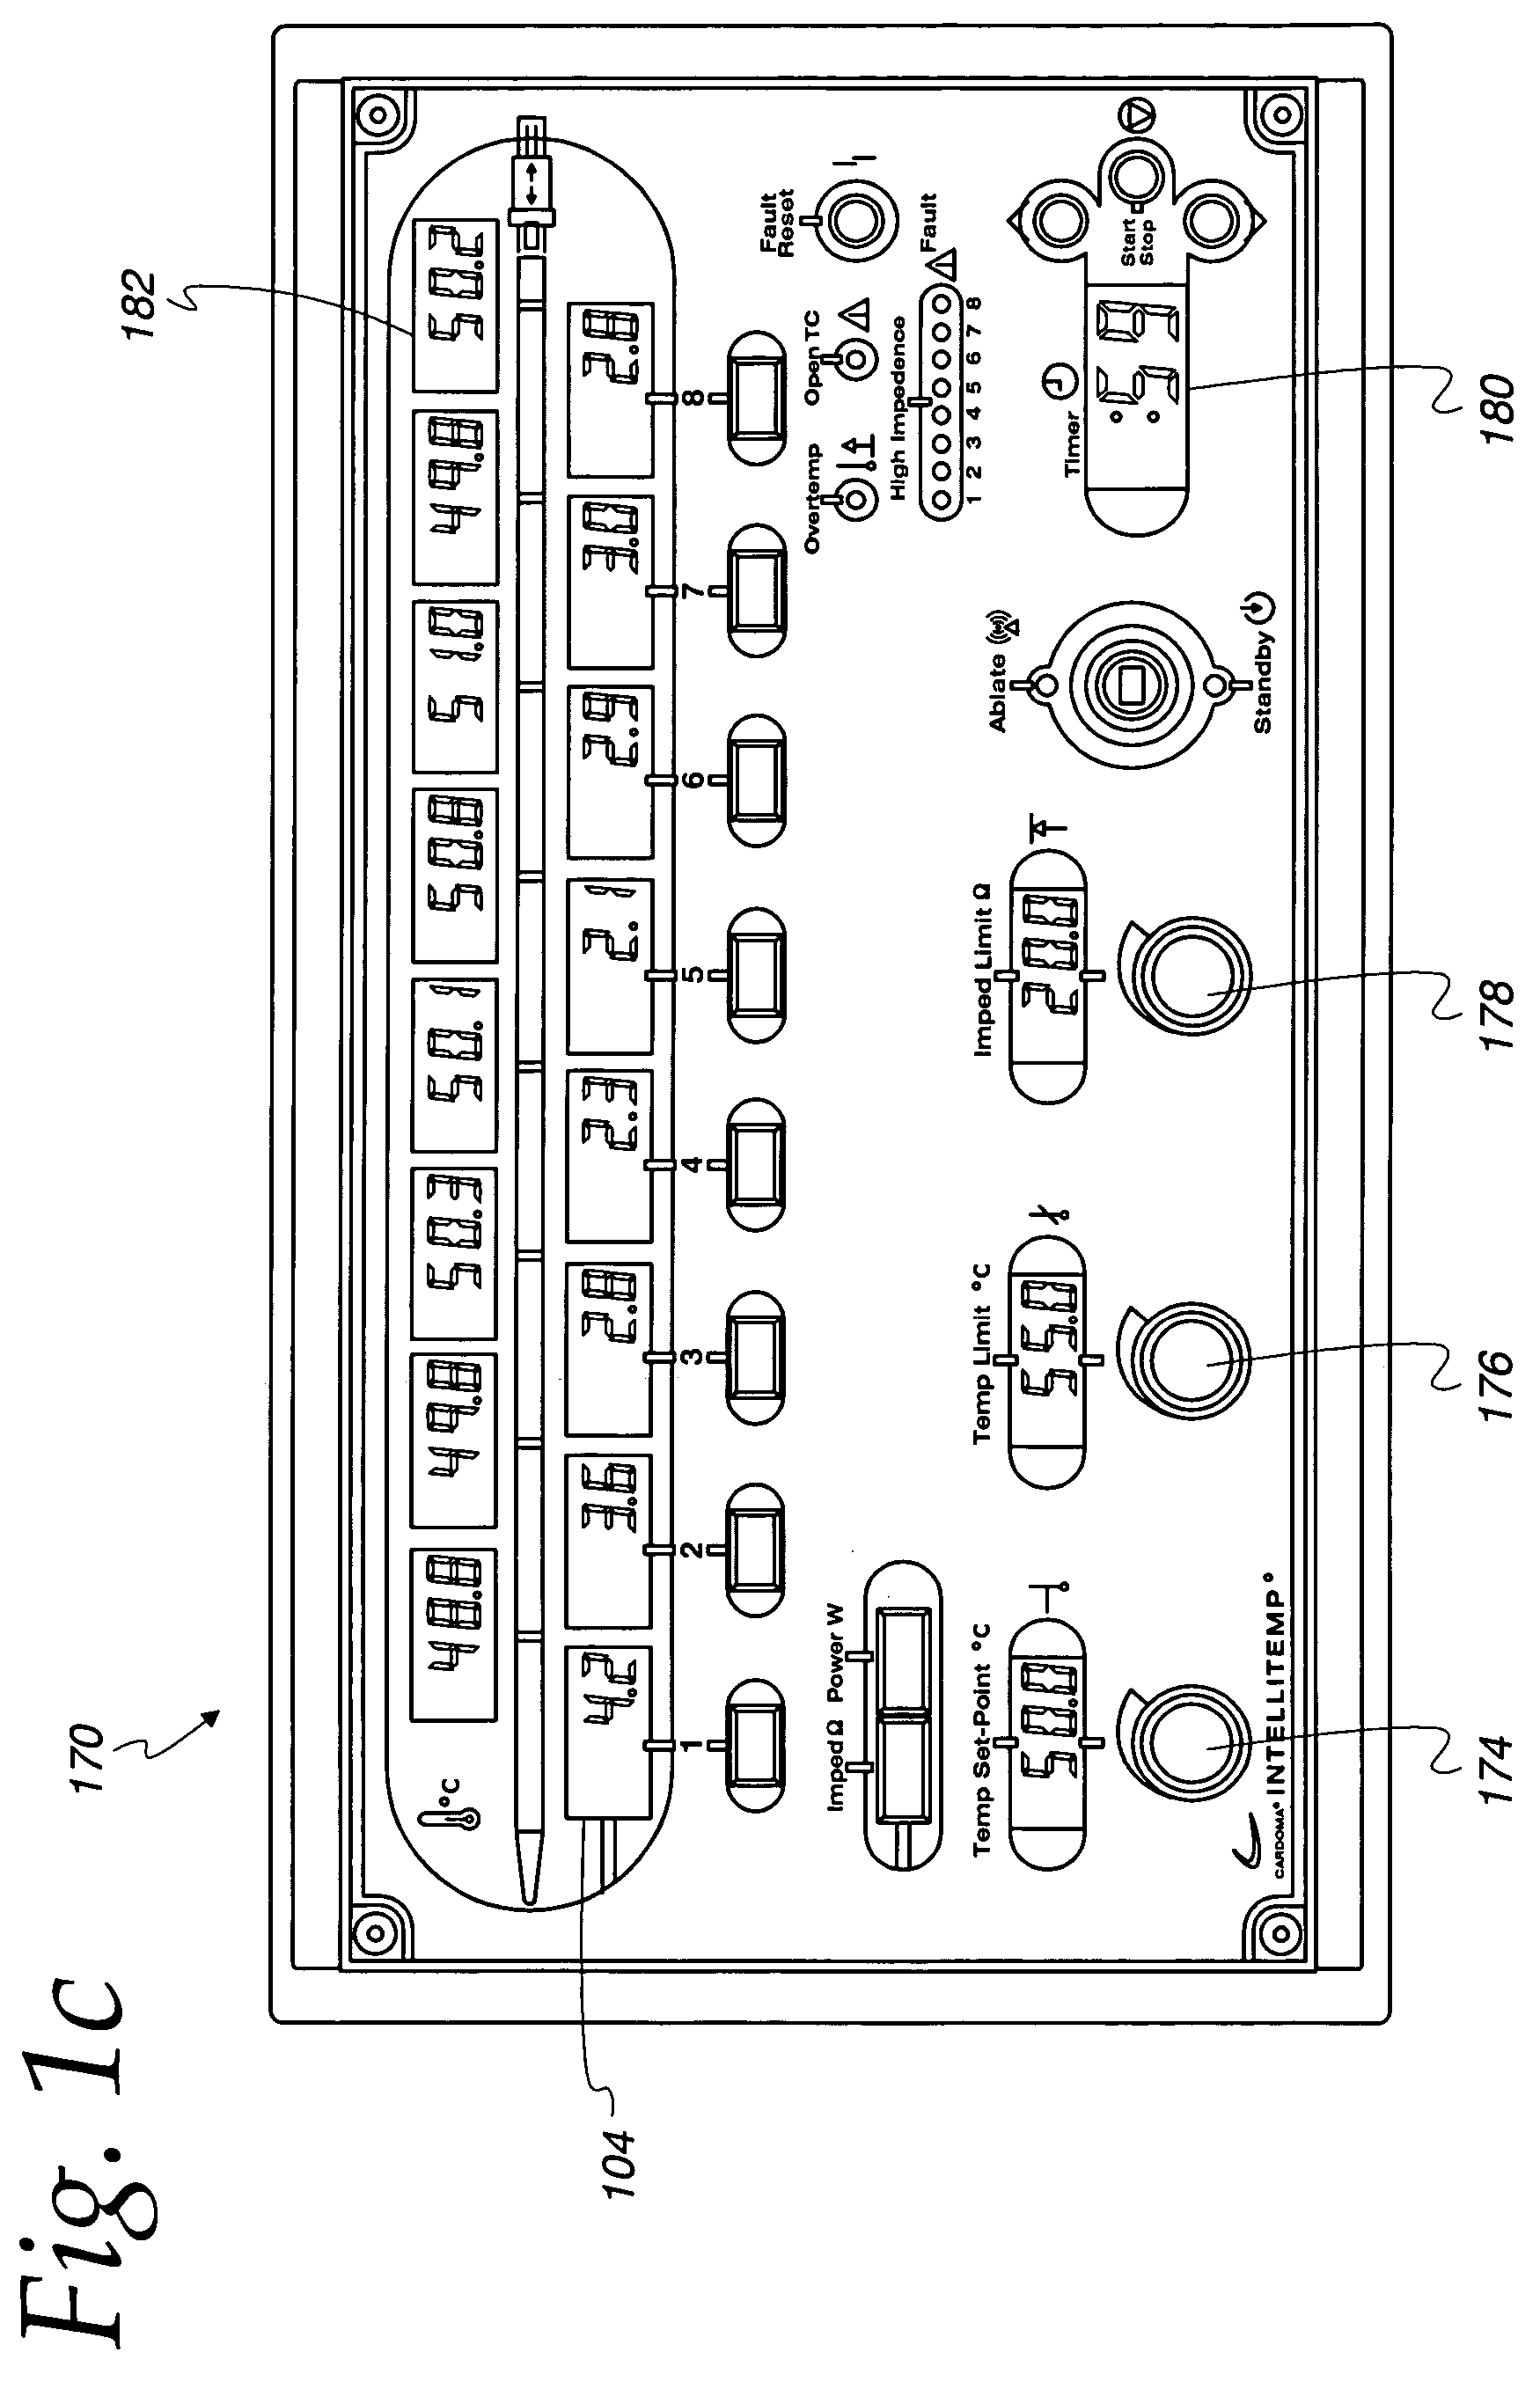 System and method for multi-channel RF energy delivery with coagulum reduction